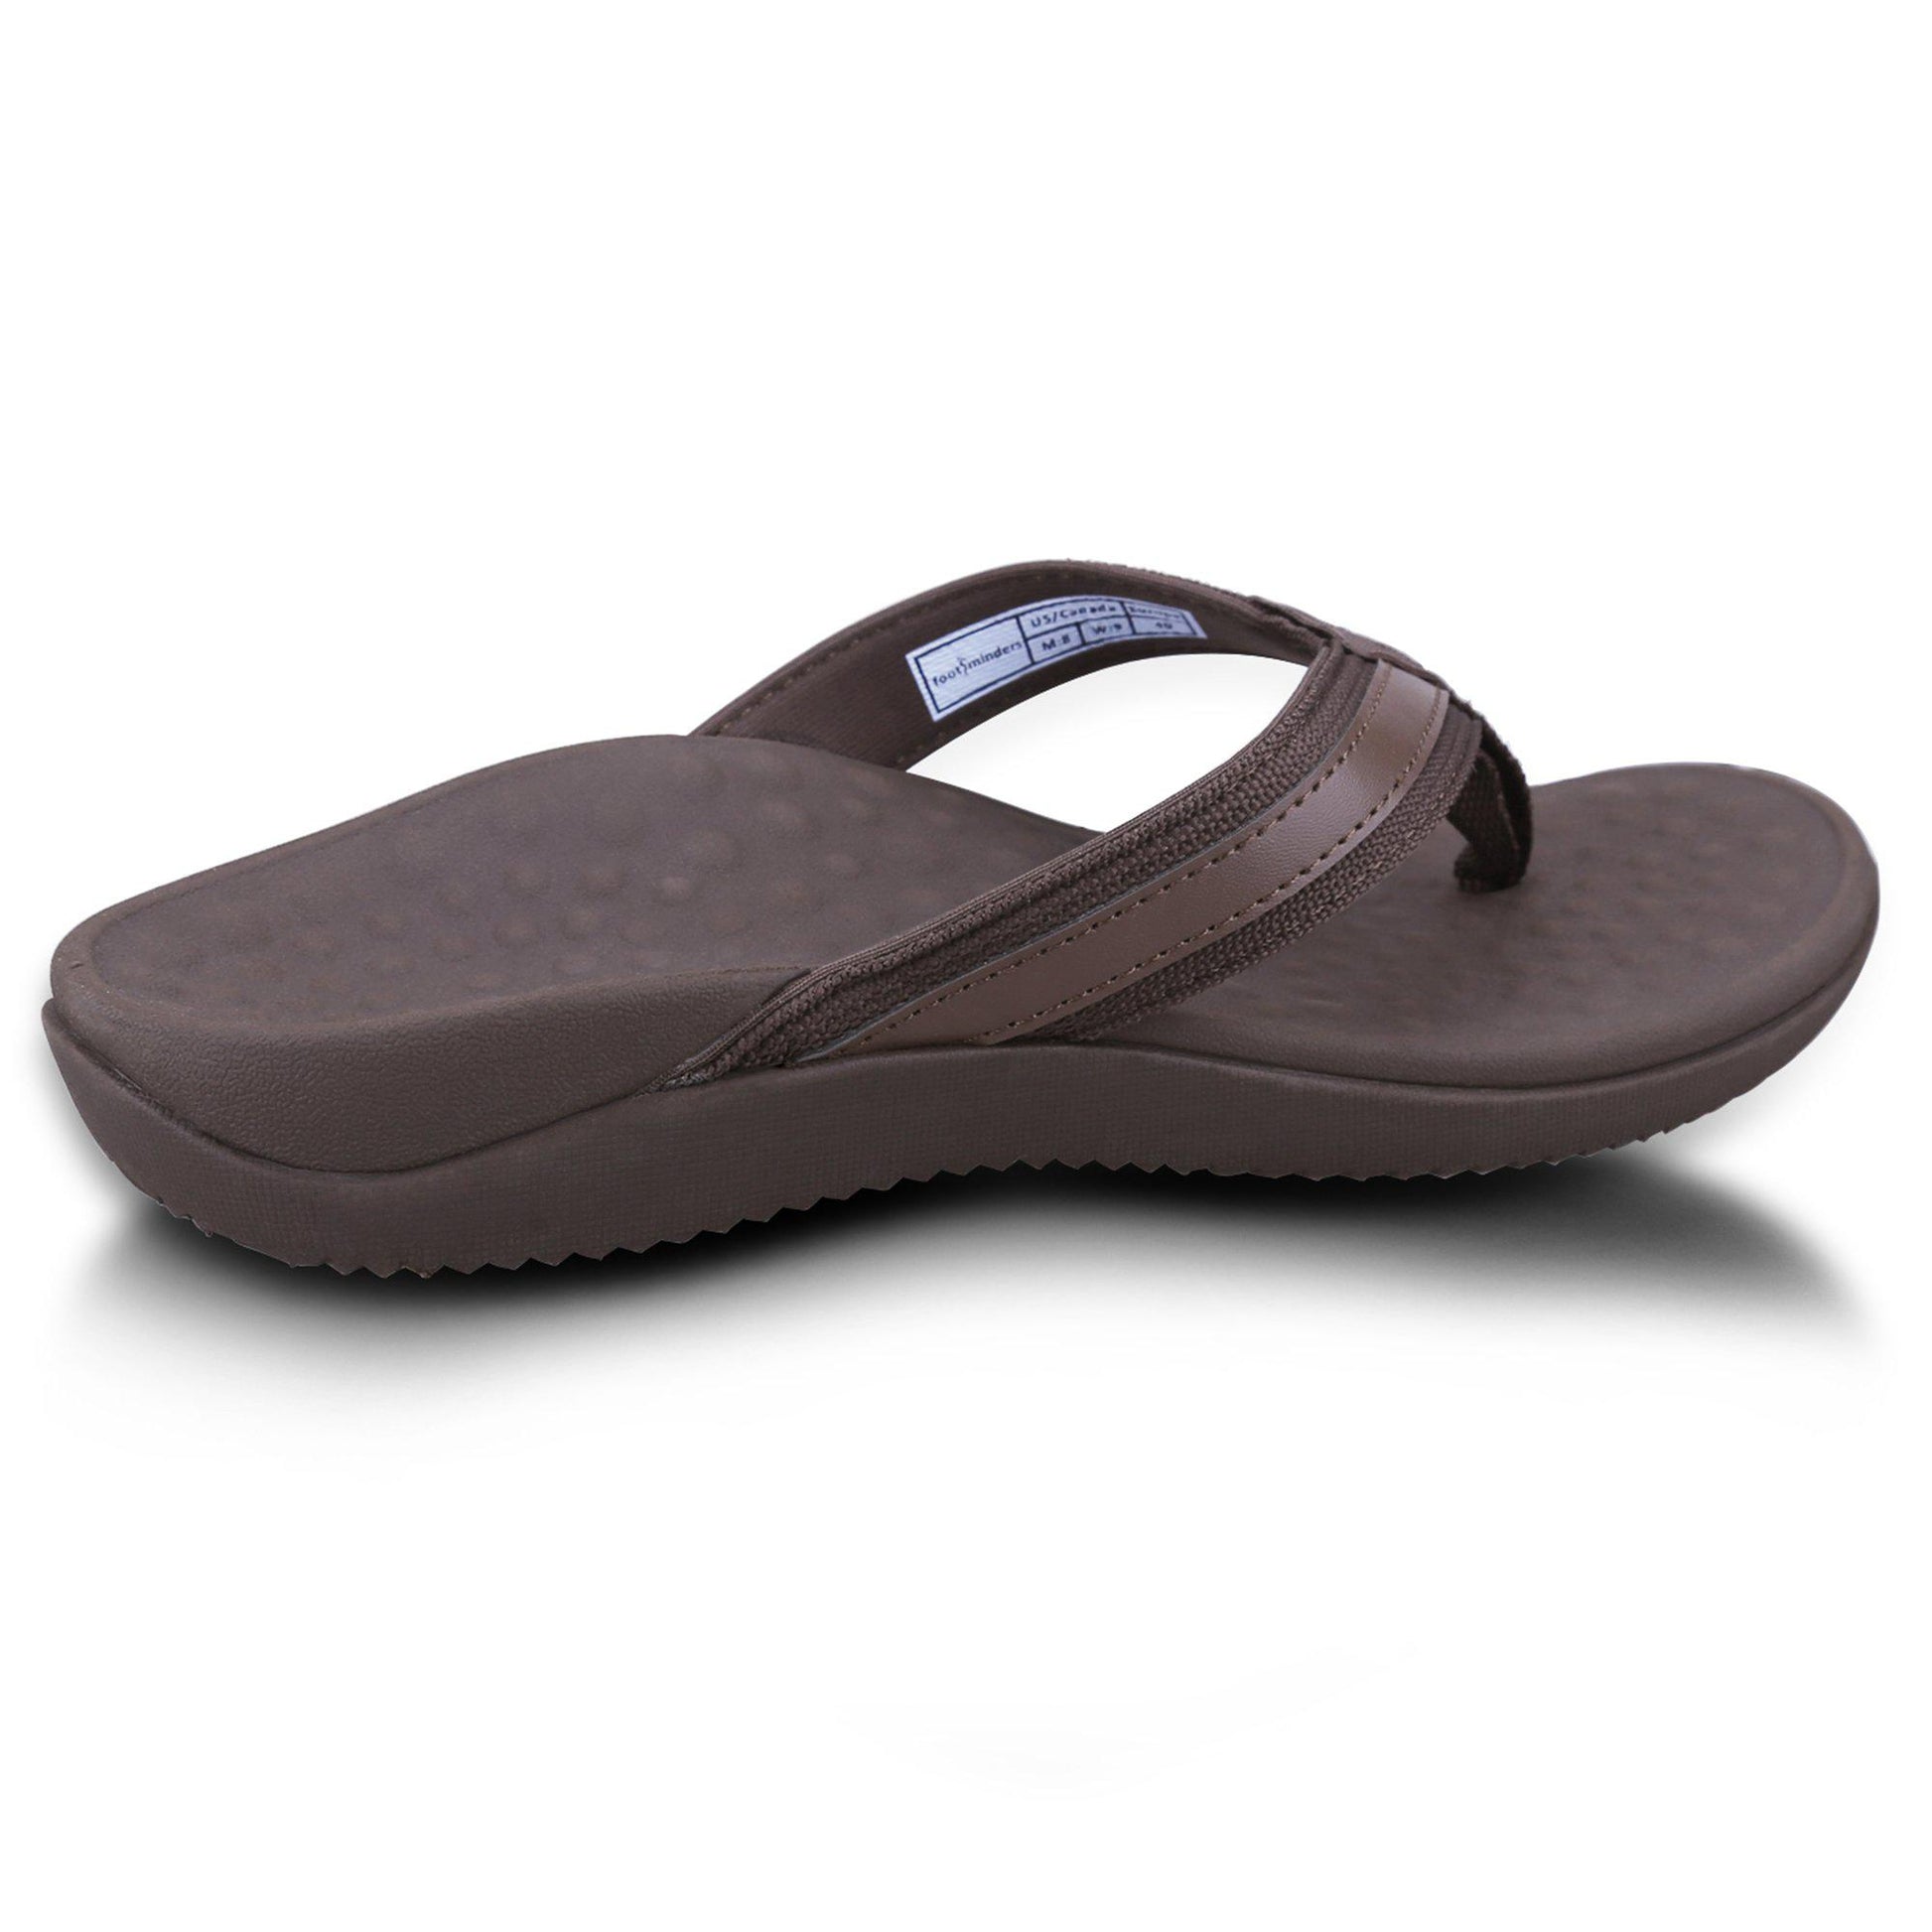 Footminders BALTRA Orthotic Sandals (Pair) - Arch Support Flip-Flops for Men and Women - Relieve Foot Pain Due to Flat Feet and Plantar Fasciitis - Footminders Inc.